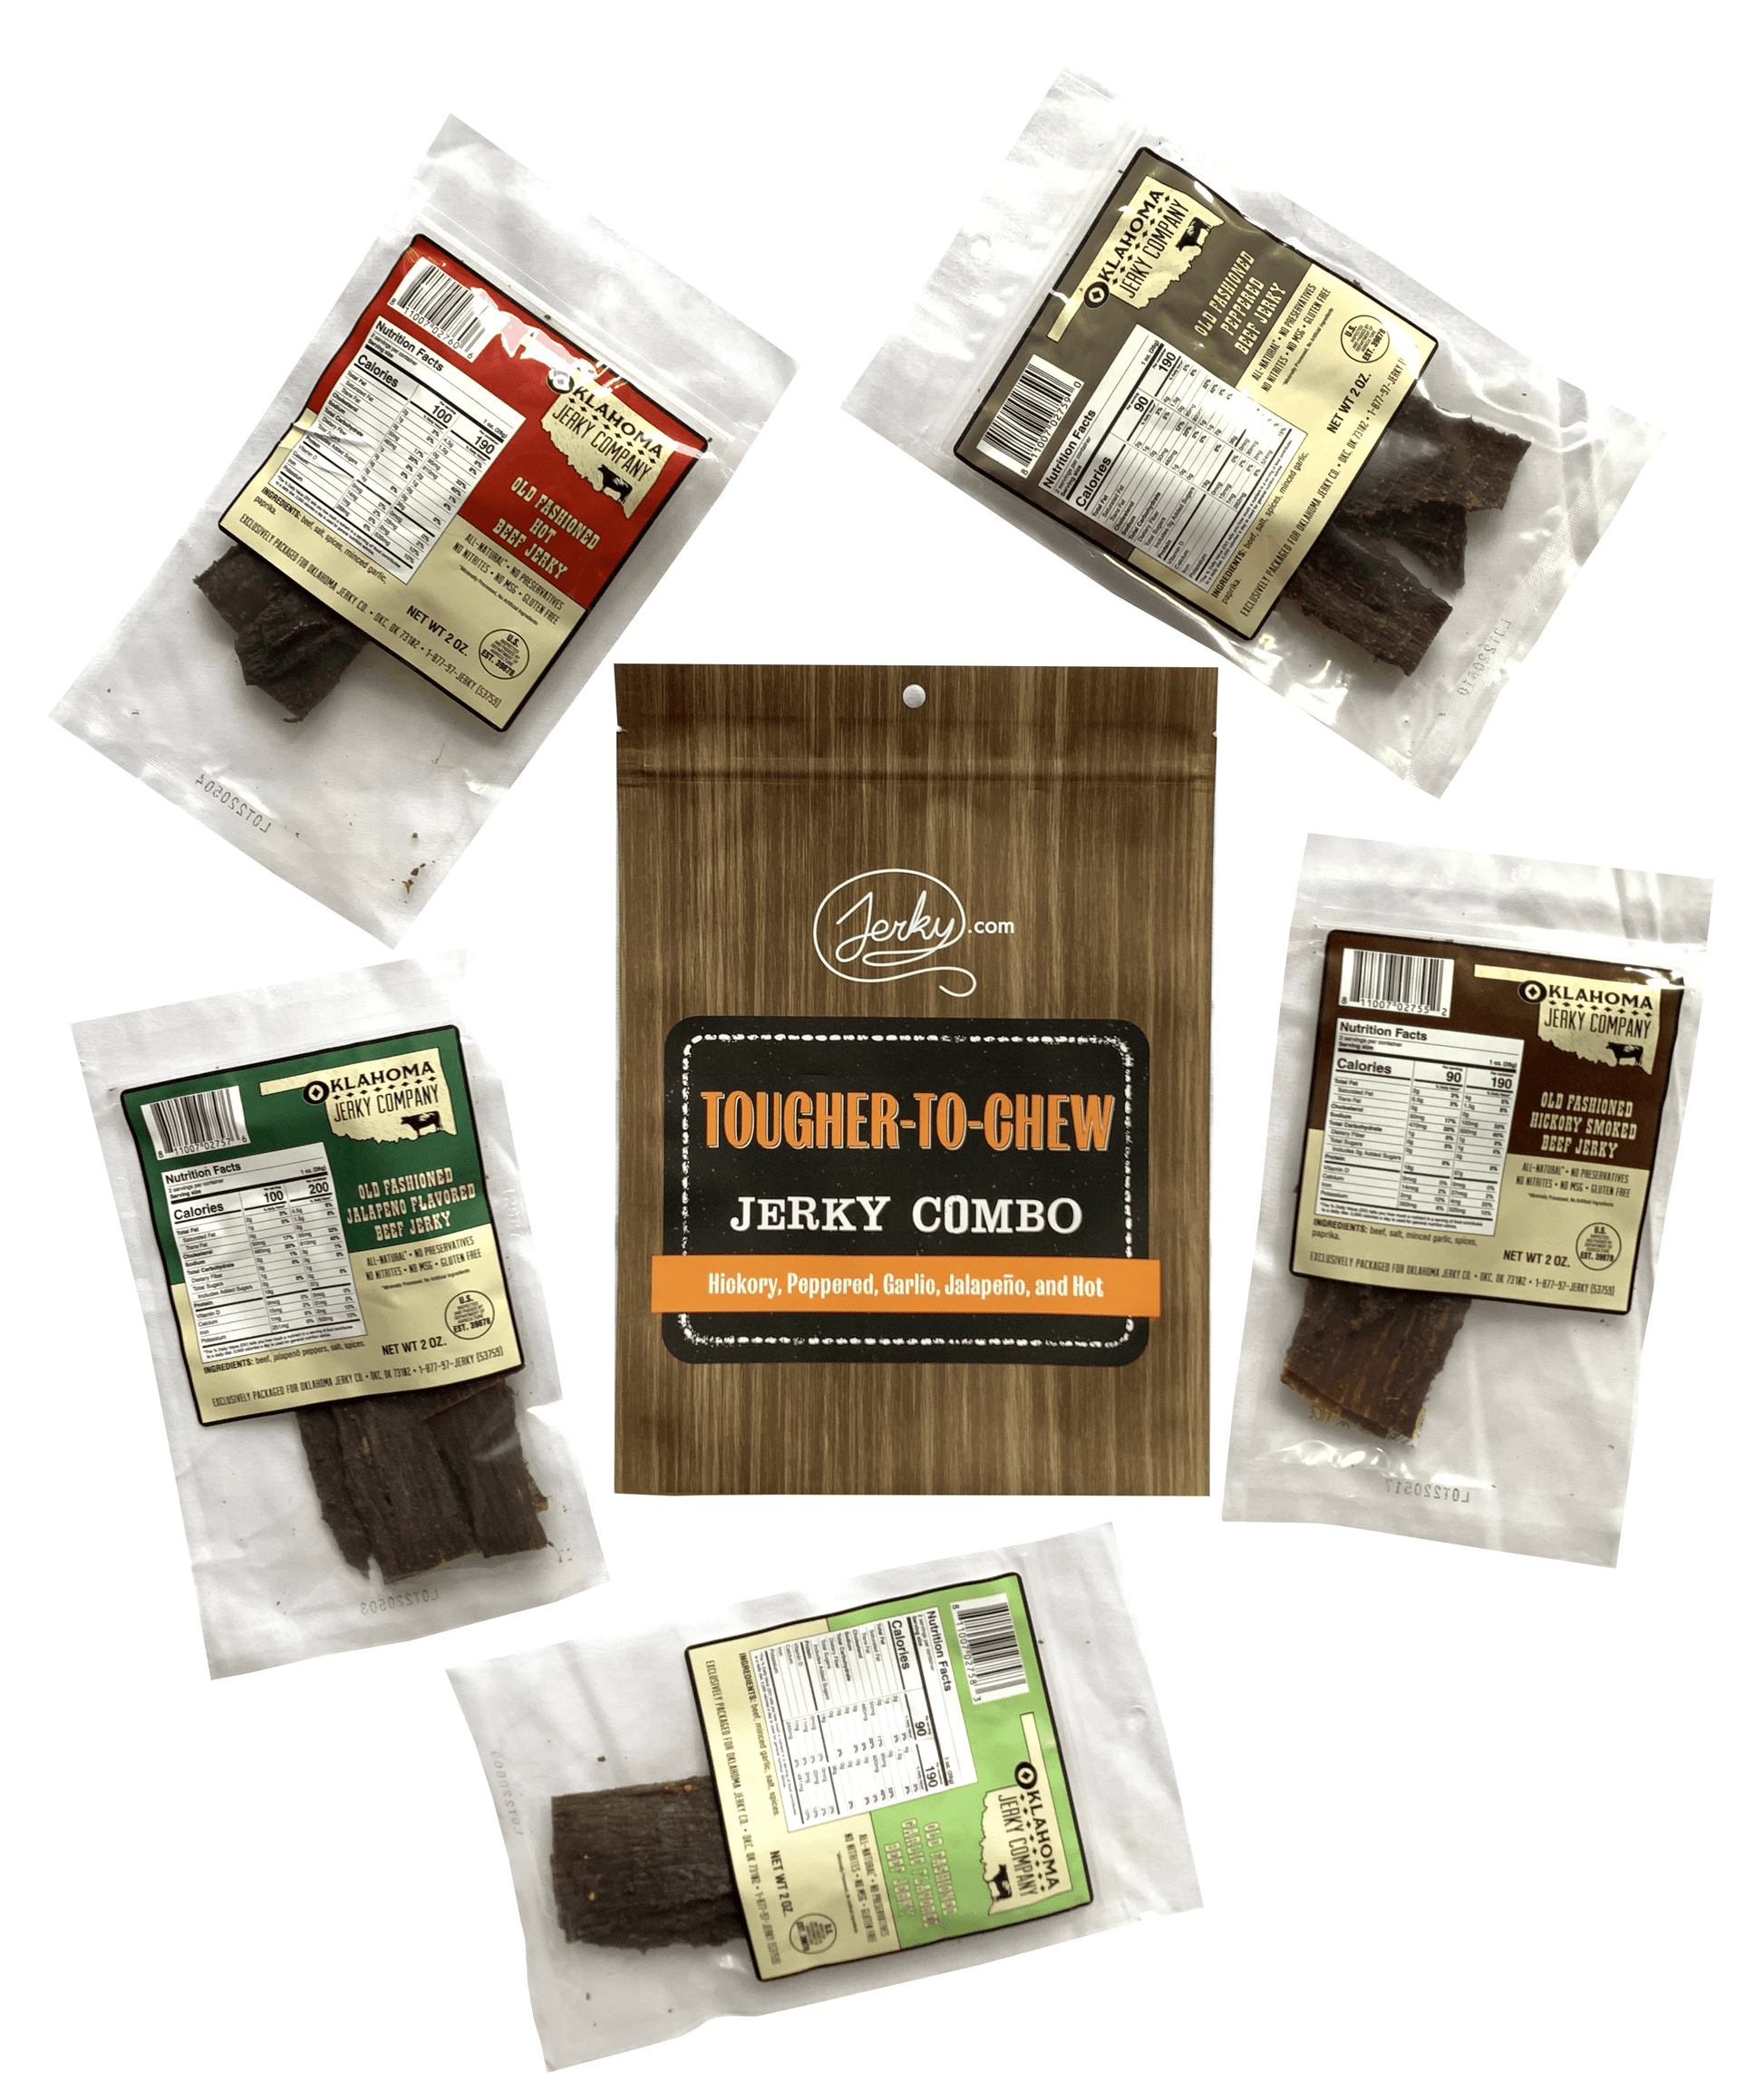 Tougher-to-Chew Combo Offer by Jerky.com